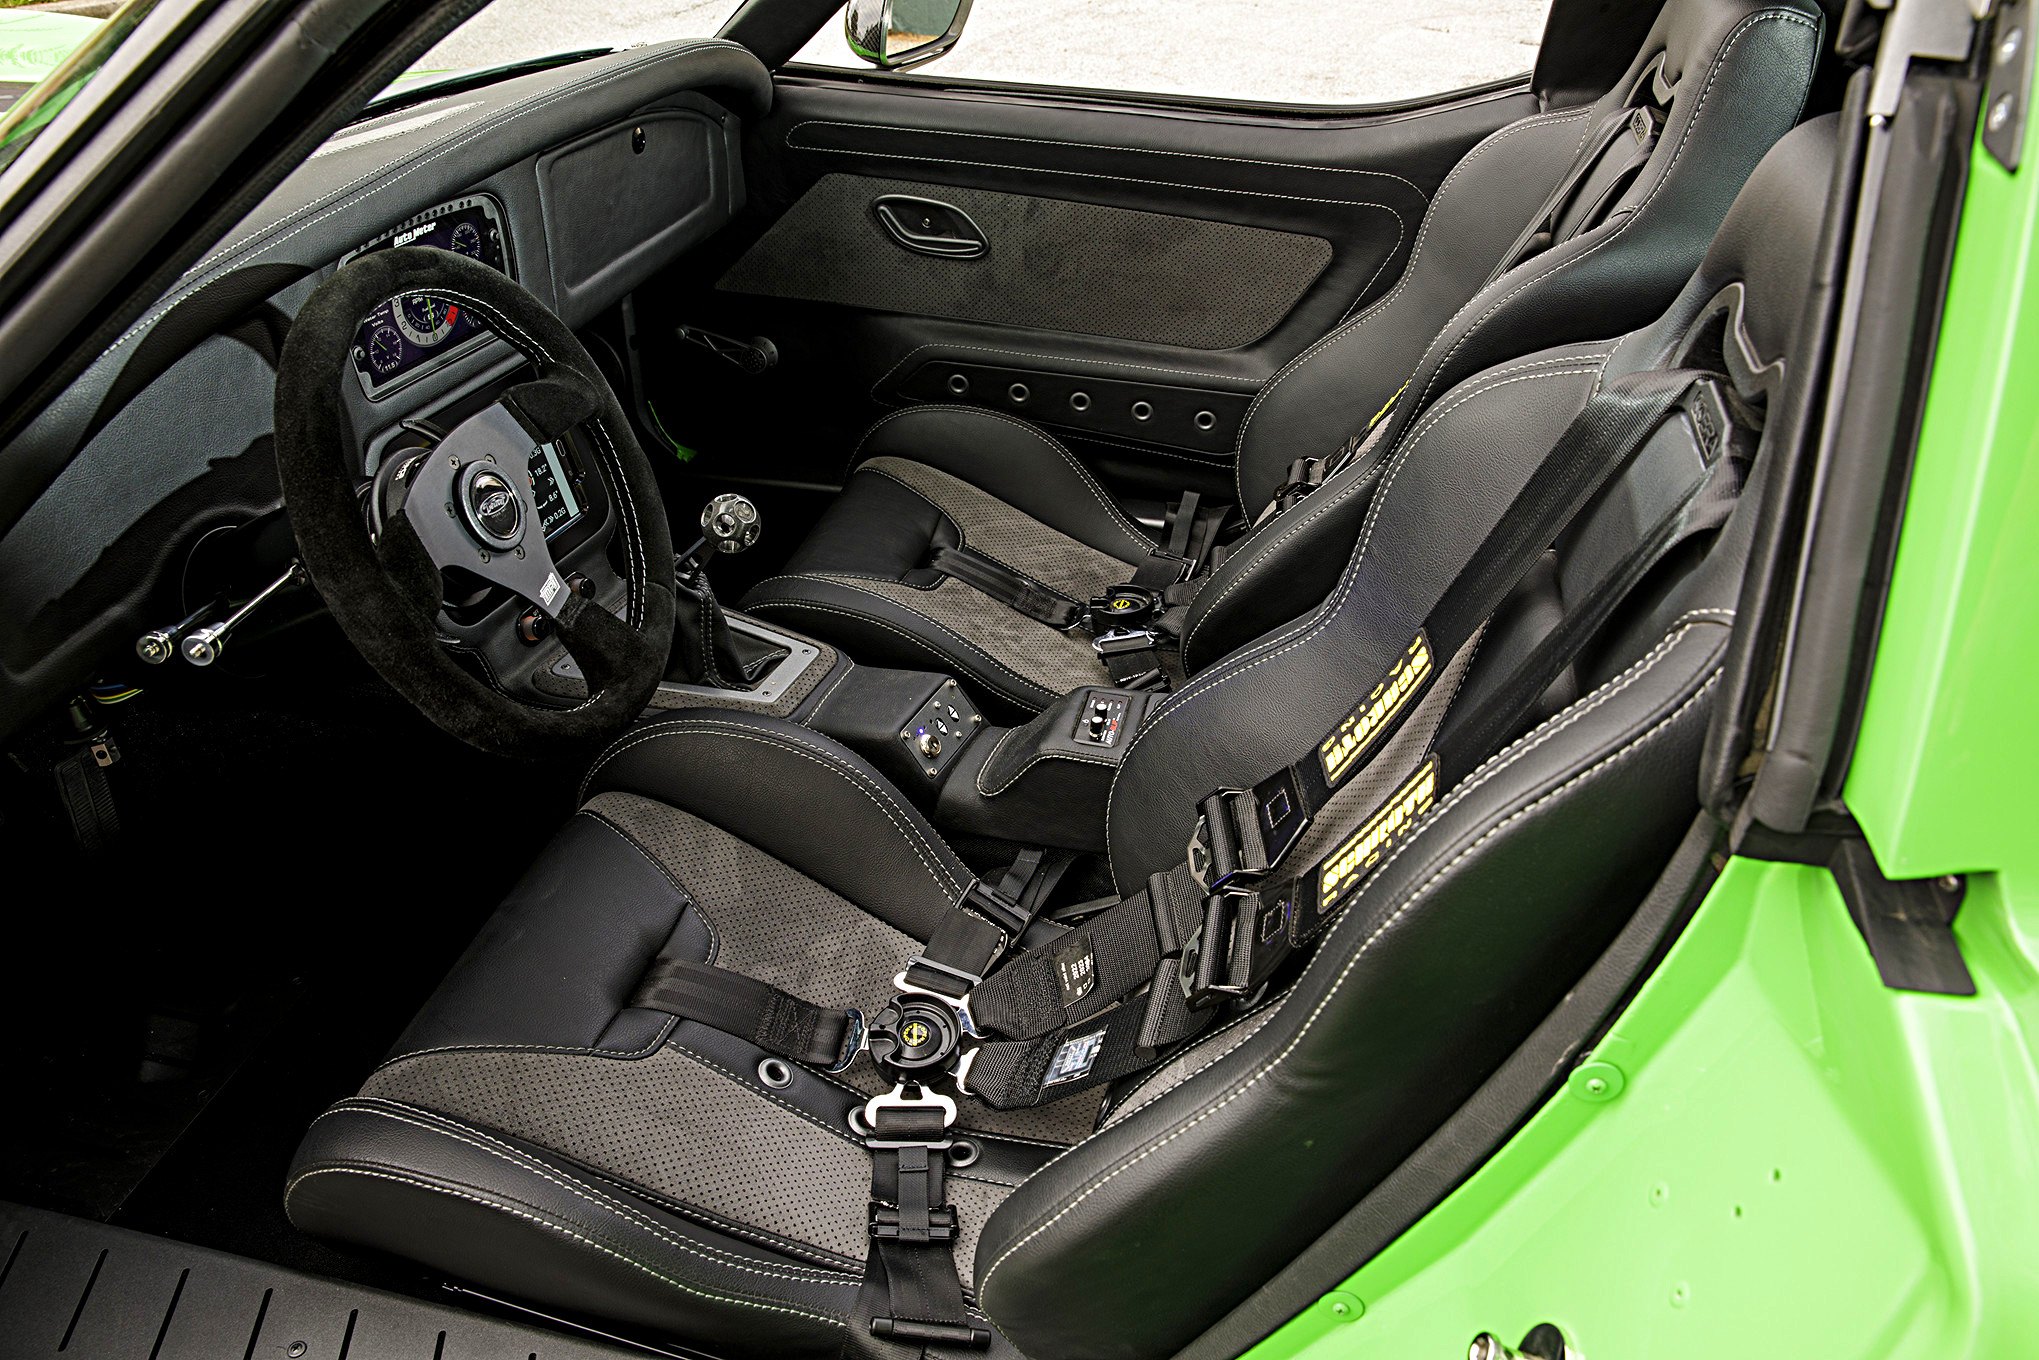 Green Debadged Chevy Corvette with Aftermarket Steering Wheel - Photo by Robert McGaffin